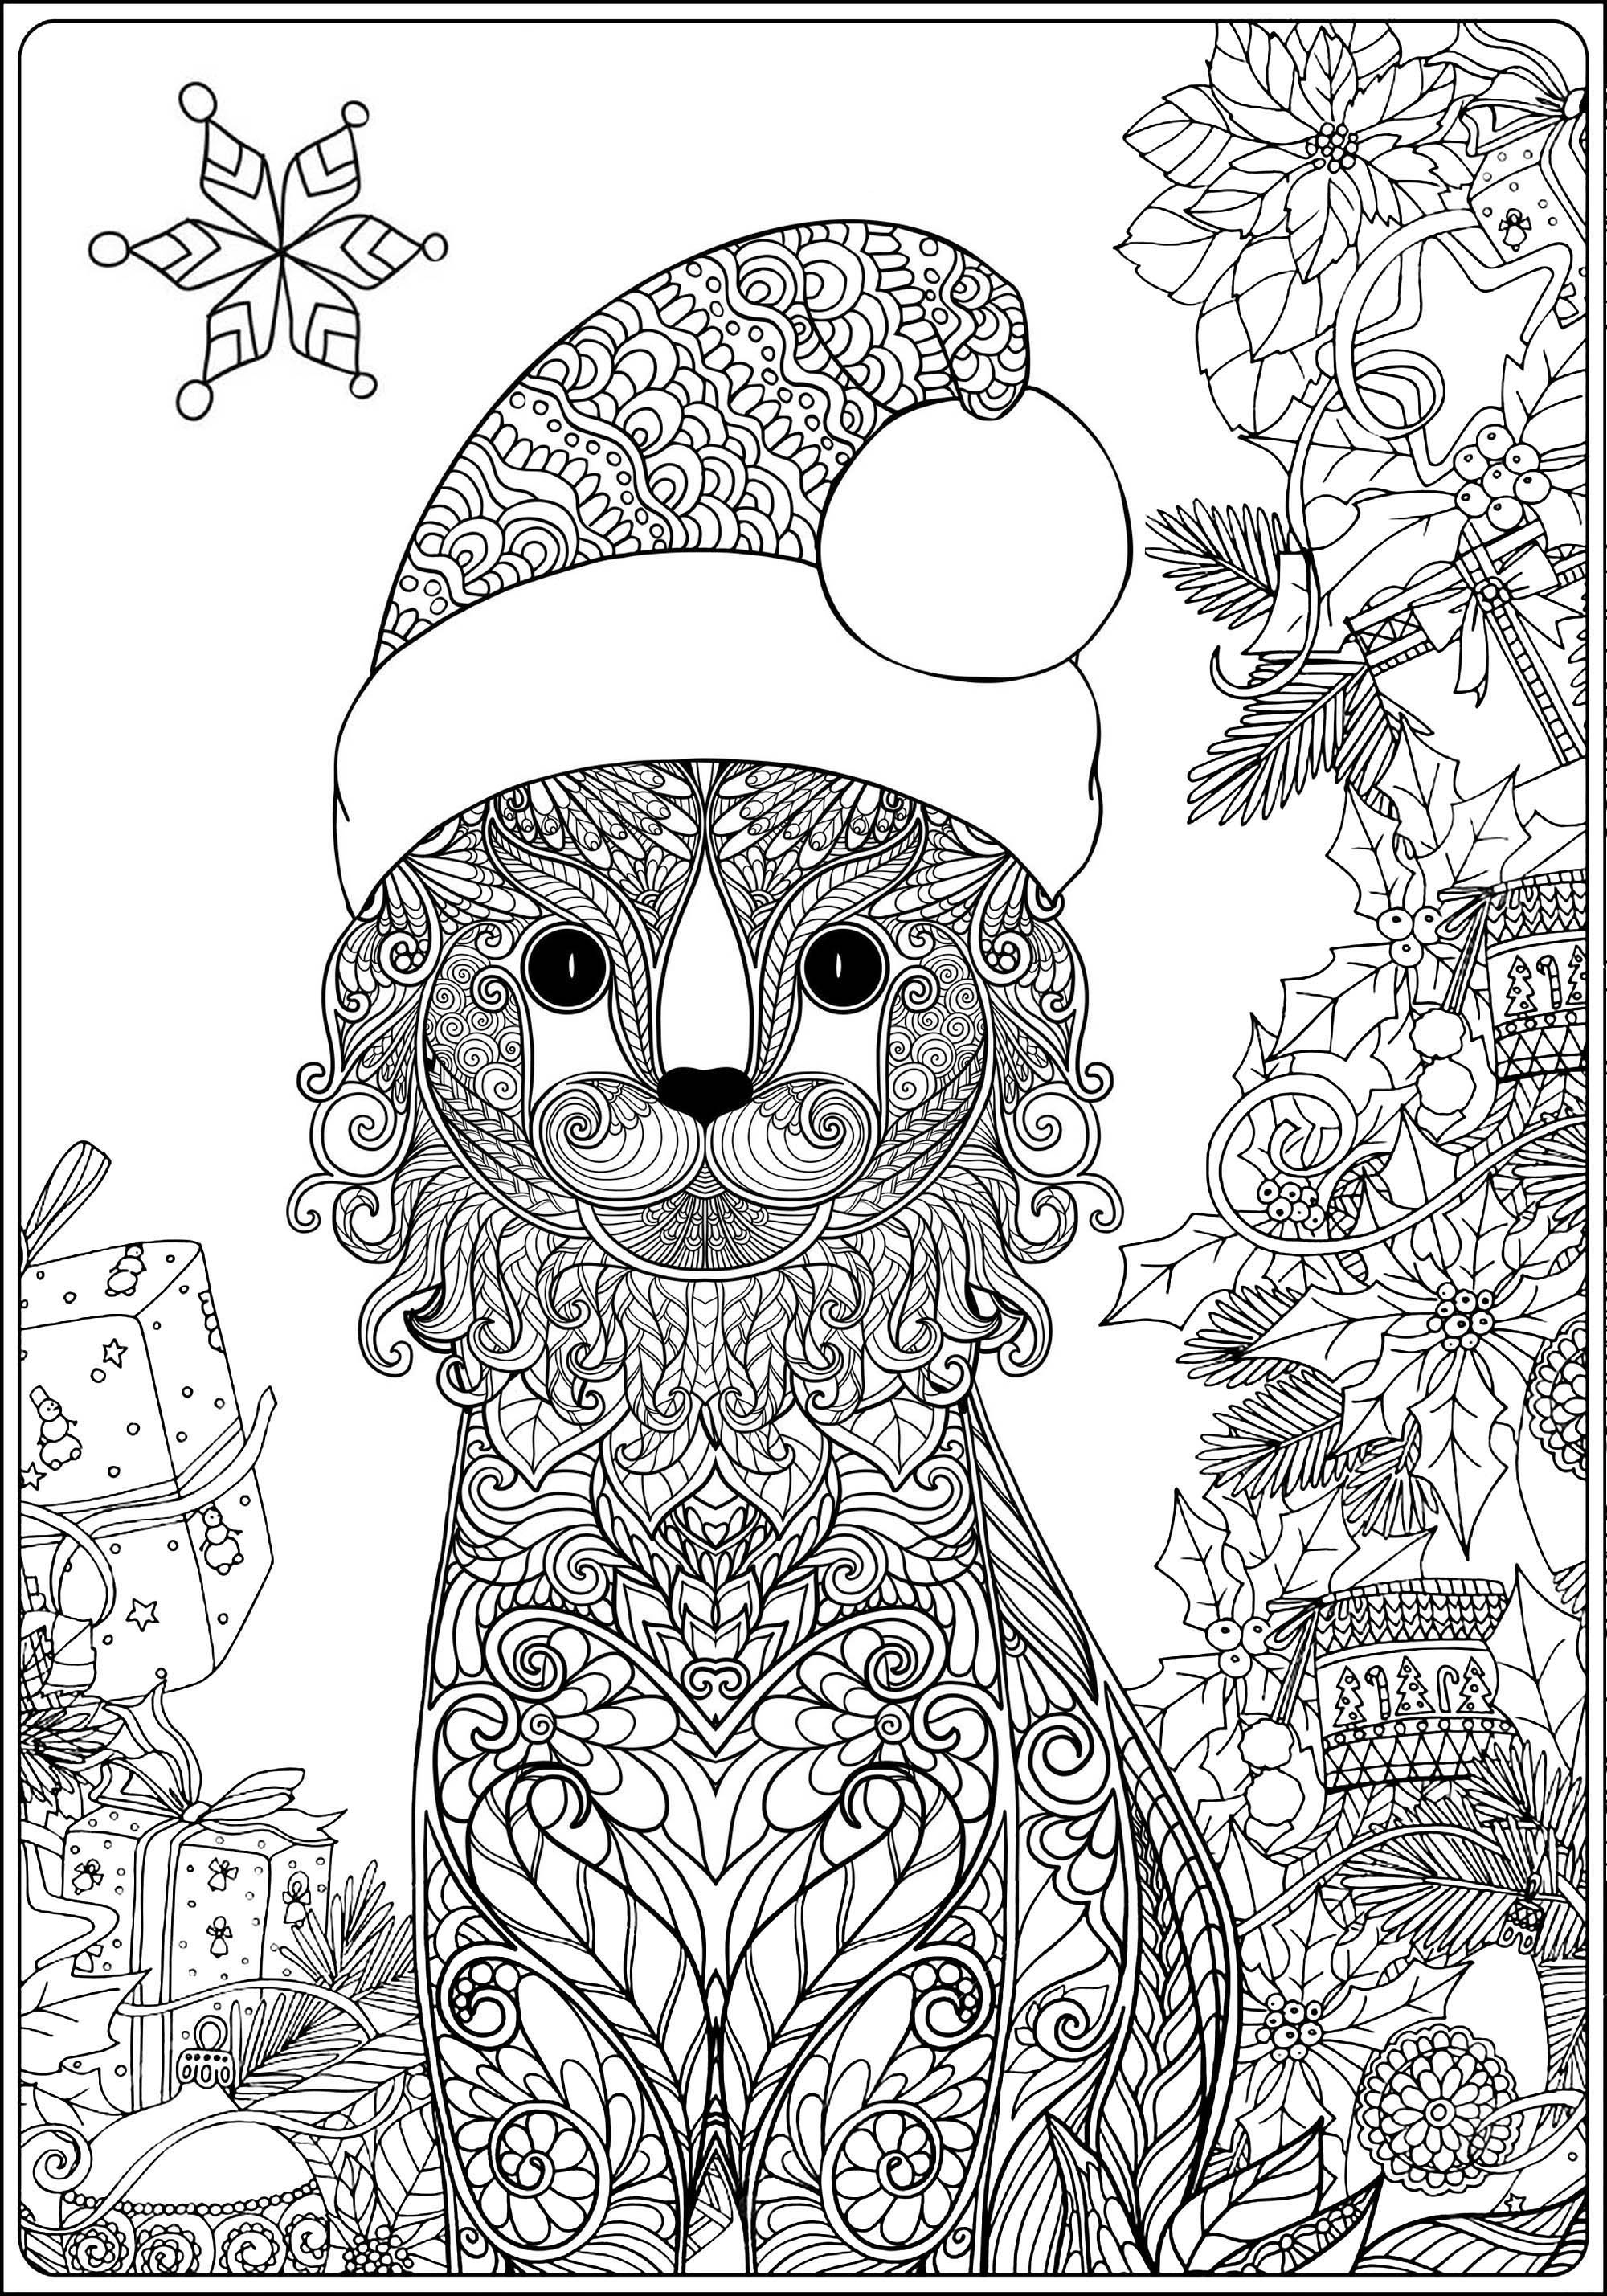 A Cat ready for Christmas time, with beautiful ornaments around, and complex patterns, Source : 123rf   Artist : Elena Besedina